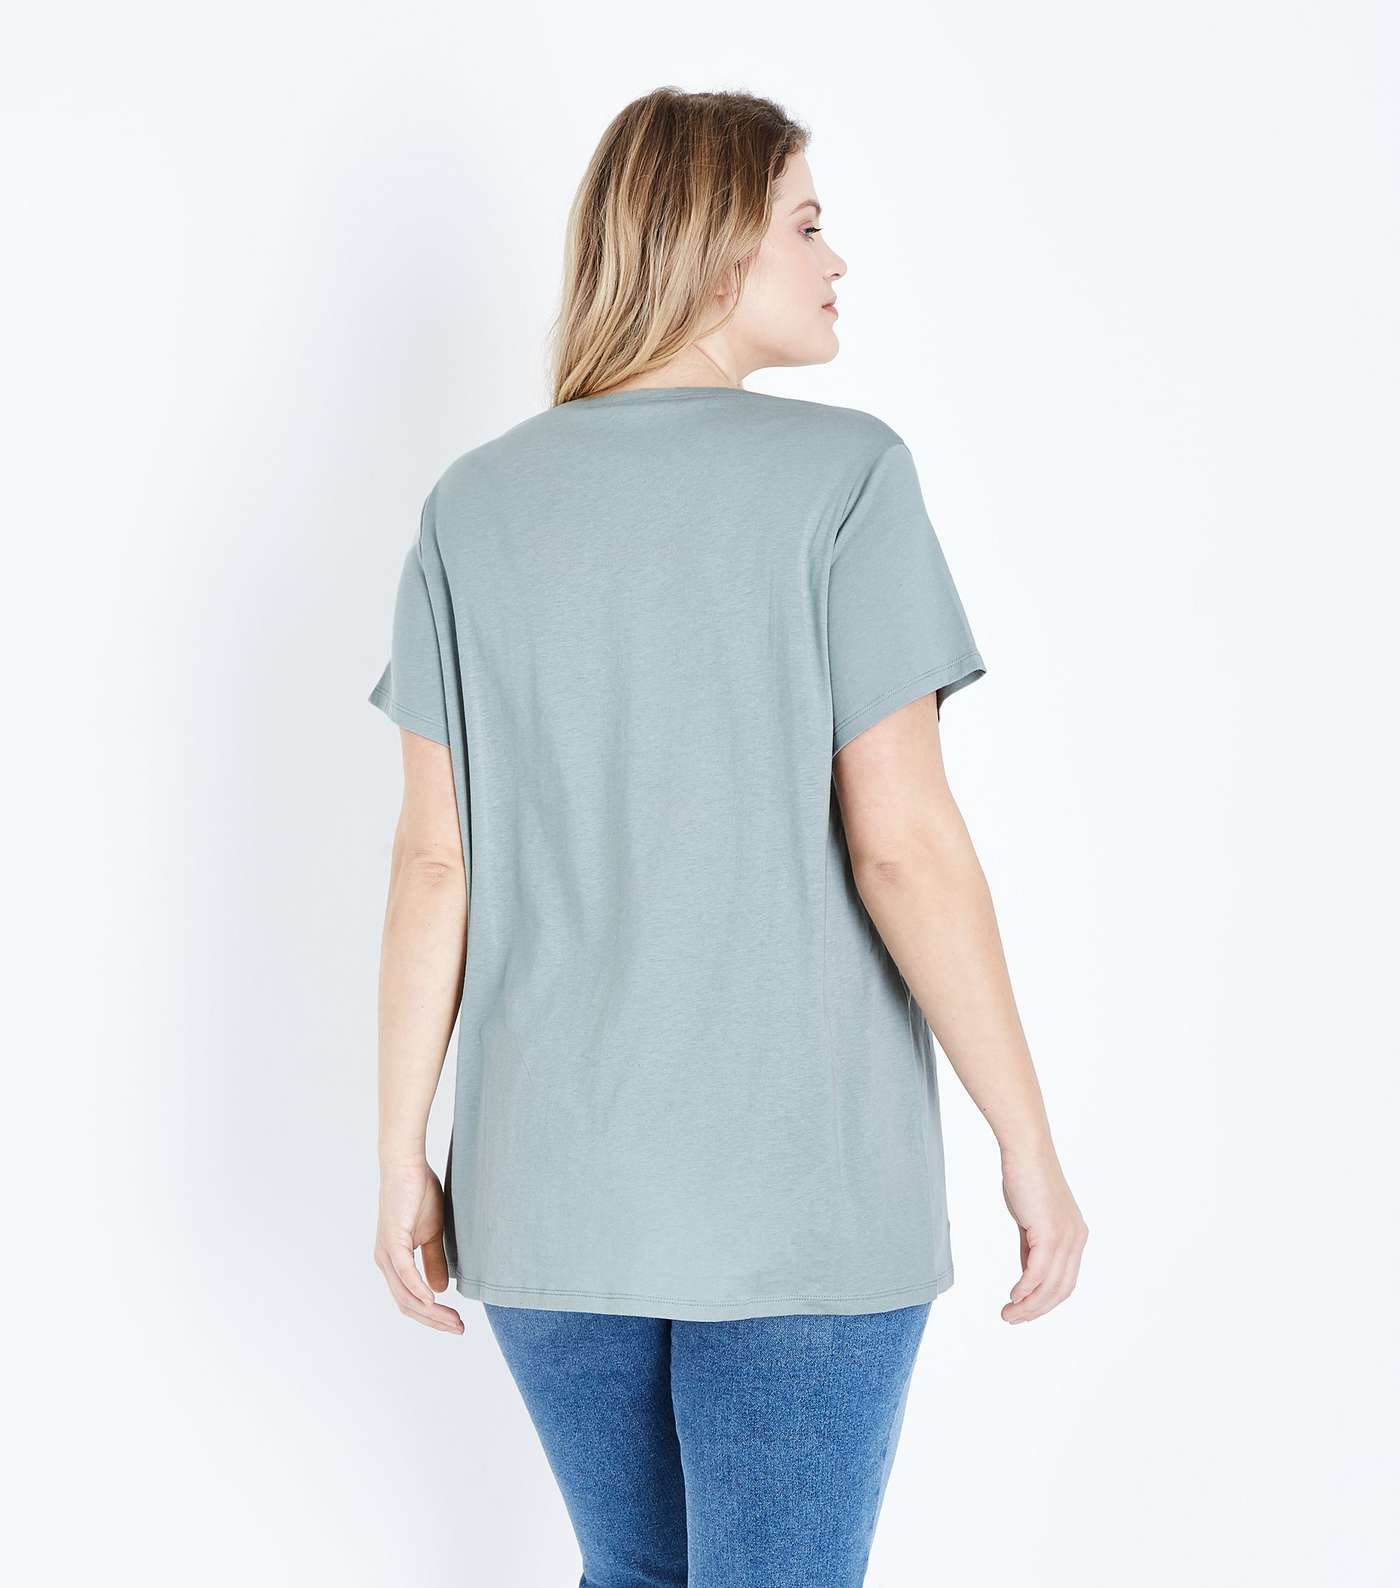 Curves Mint Green Scoop Neck T-Shirt Image 3